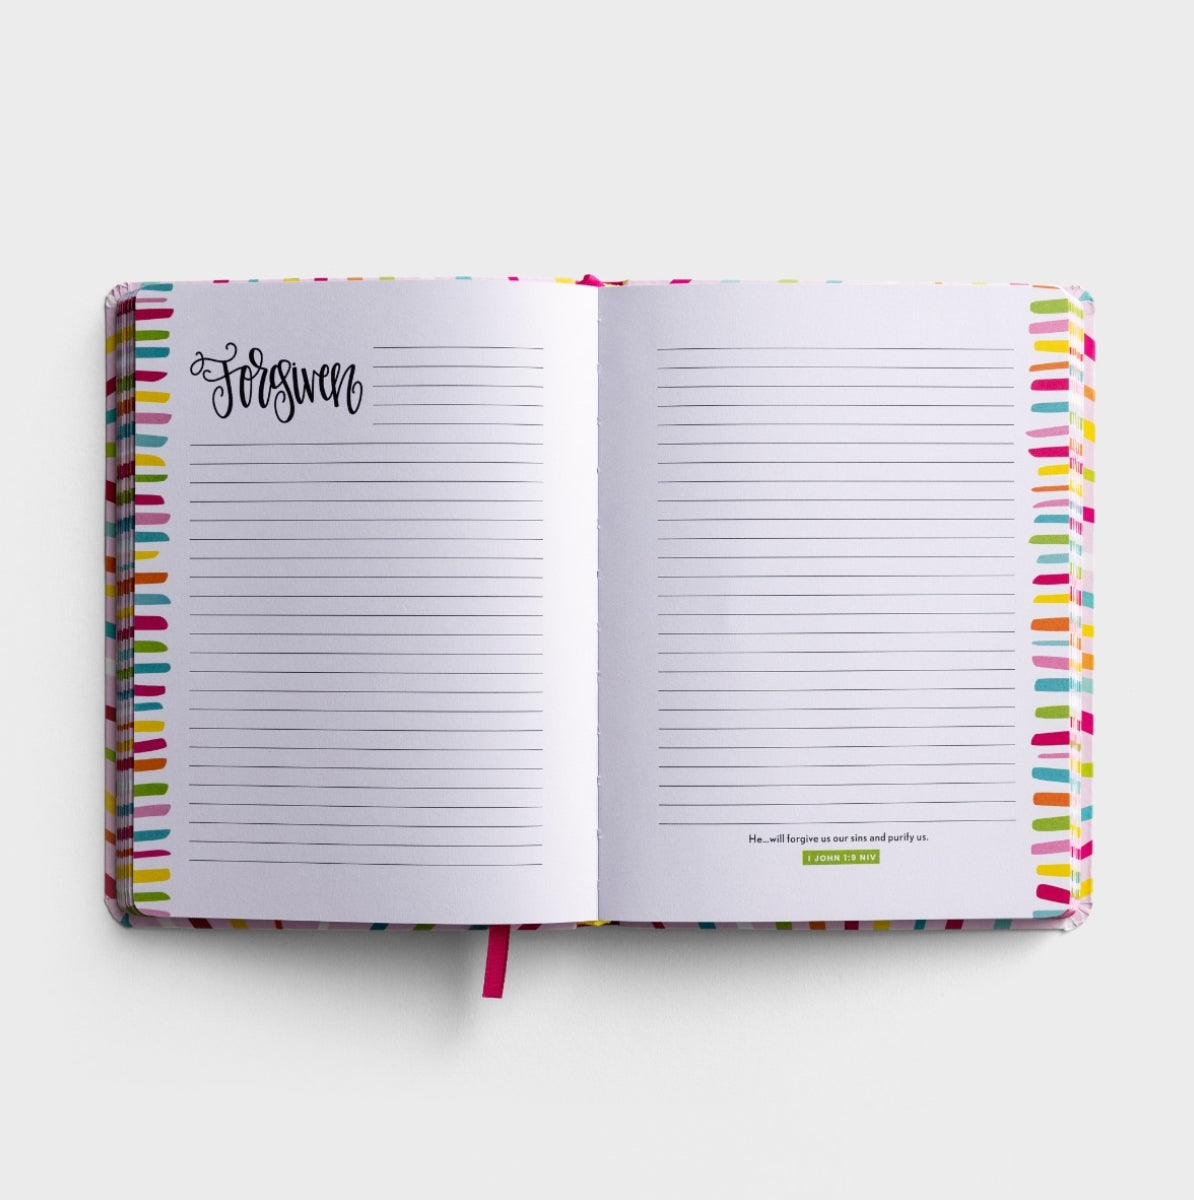 Overflowing Joy: An Inspirational Journal for Celebrating Every Day